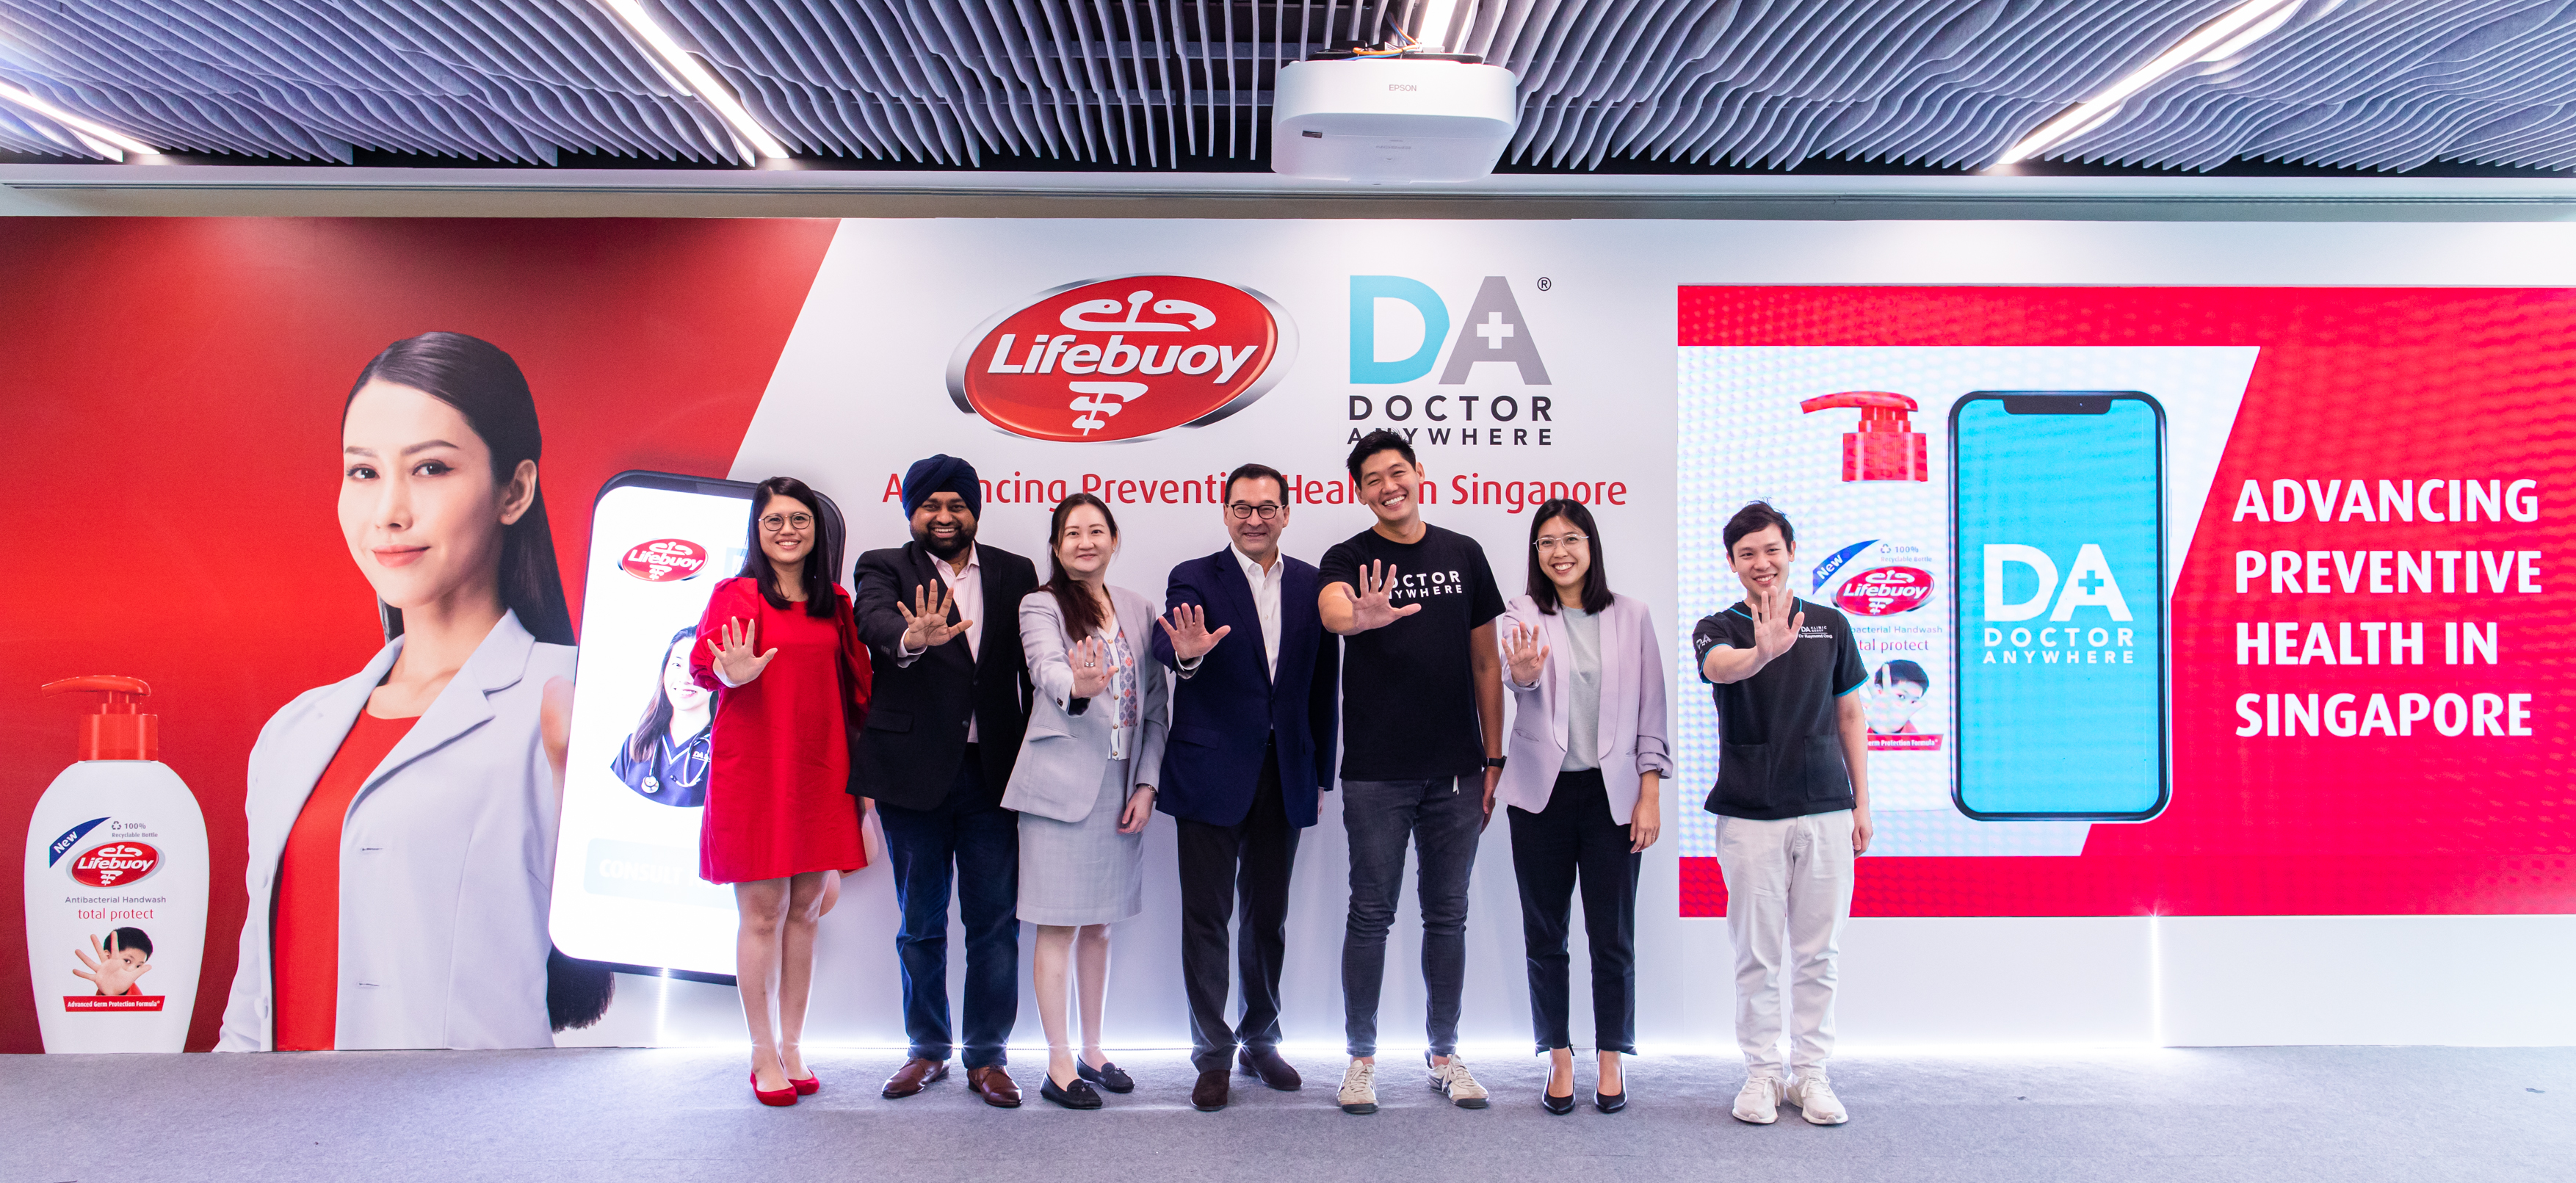 The ceremony was held at @one-north Unilever campus, the APAC headquarters for the global multinational company. From left to right, Poh Yin Khim, Global Lead Lifebuoy, Samir Singh, Global CMO Personal Care and CEO Singapore, Unilever, Fong Pin Fen, Vice President & Head, Consumer, Economic Development Board, Fabian Garcia, President of Personal Care, Unilever, Lim Wai Mun, Founder & CEO of Doctor Anywhere, Audrey Loke, Director, Enterprise Singapore and Dr Raymond Ong, Senior Doctor, Doctor Anywhere